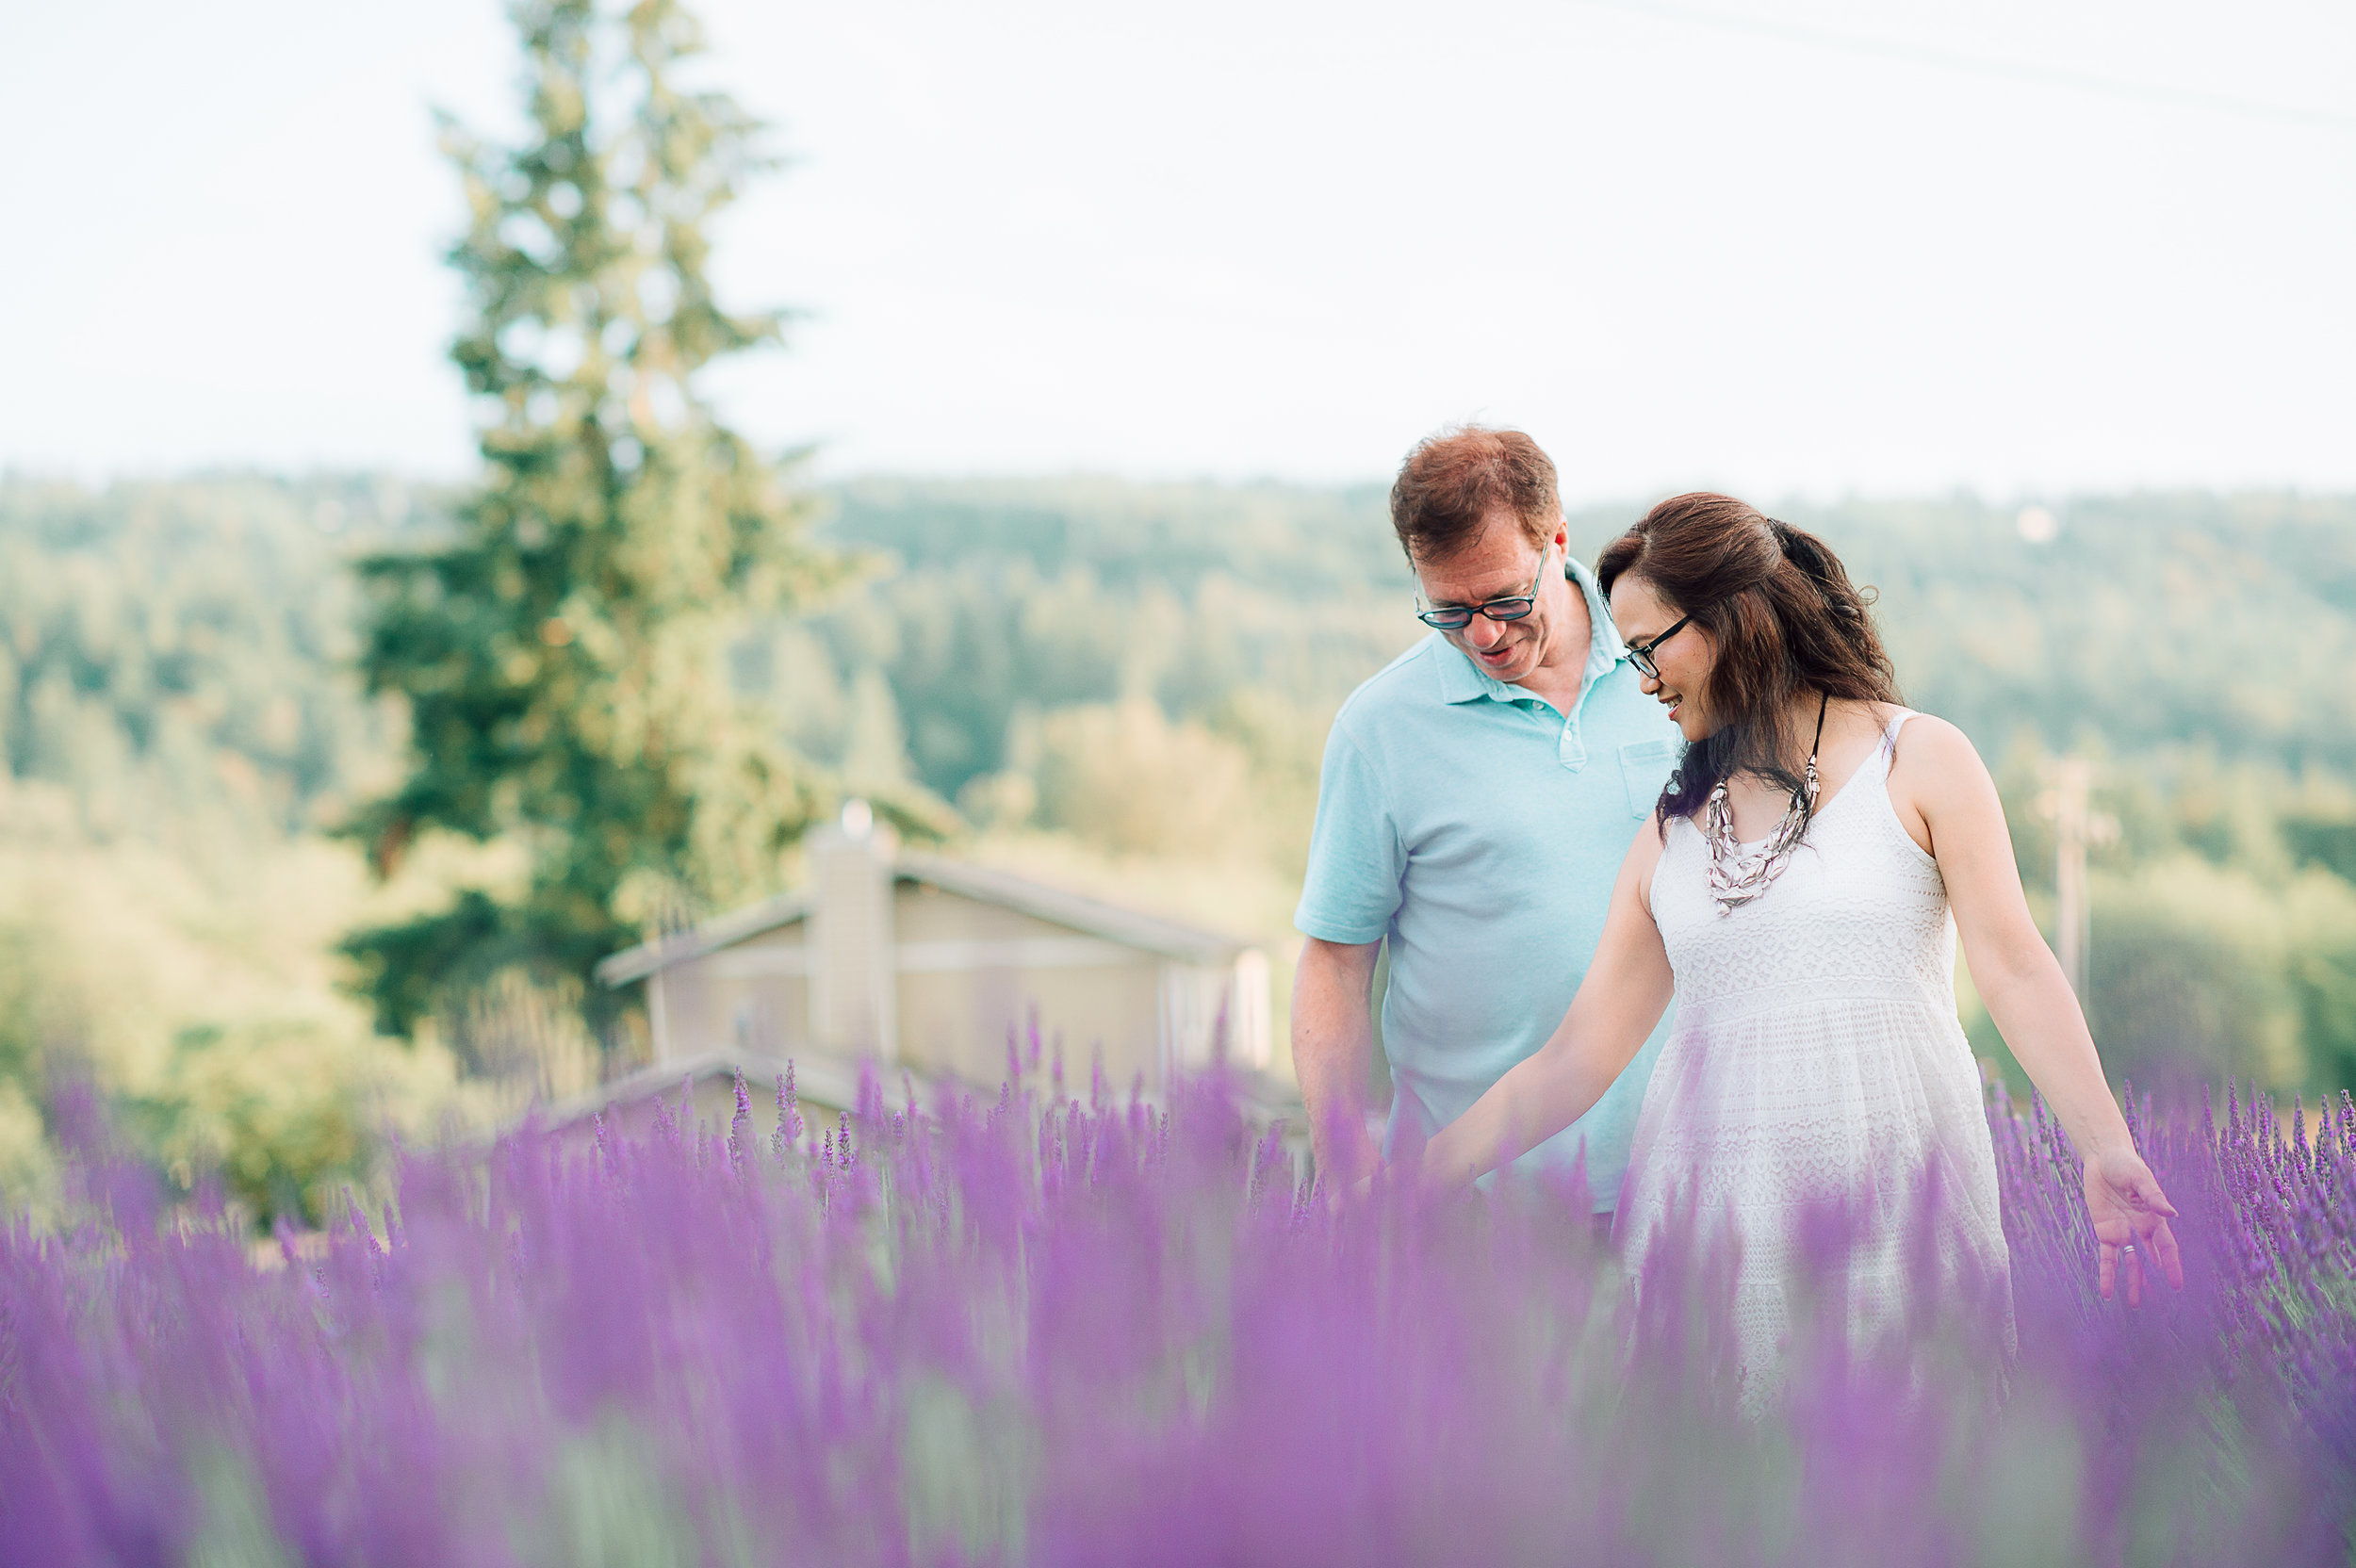 engagement_lavenderfield_youseephotography_LidiaOtto (16).jpg